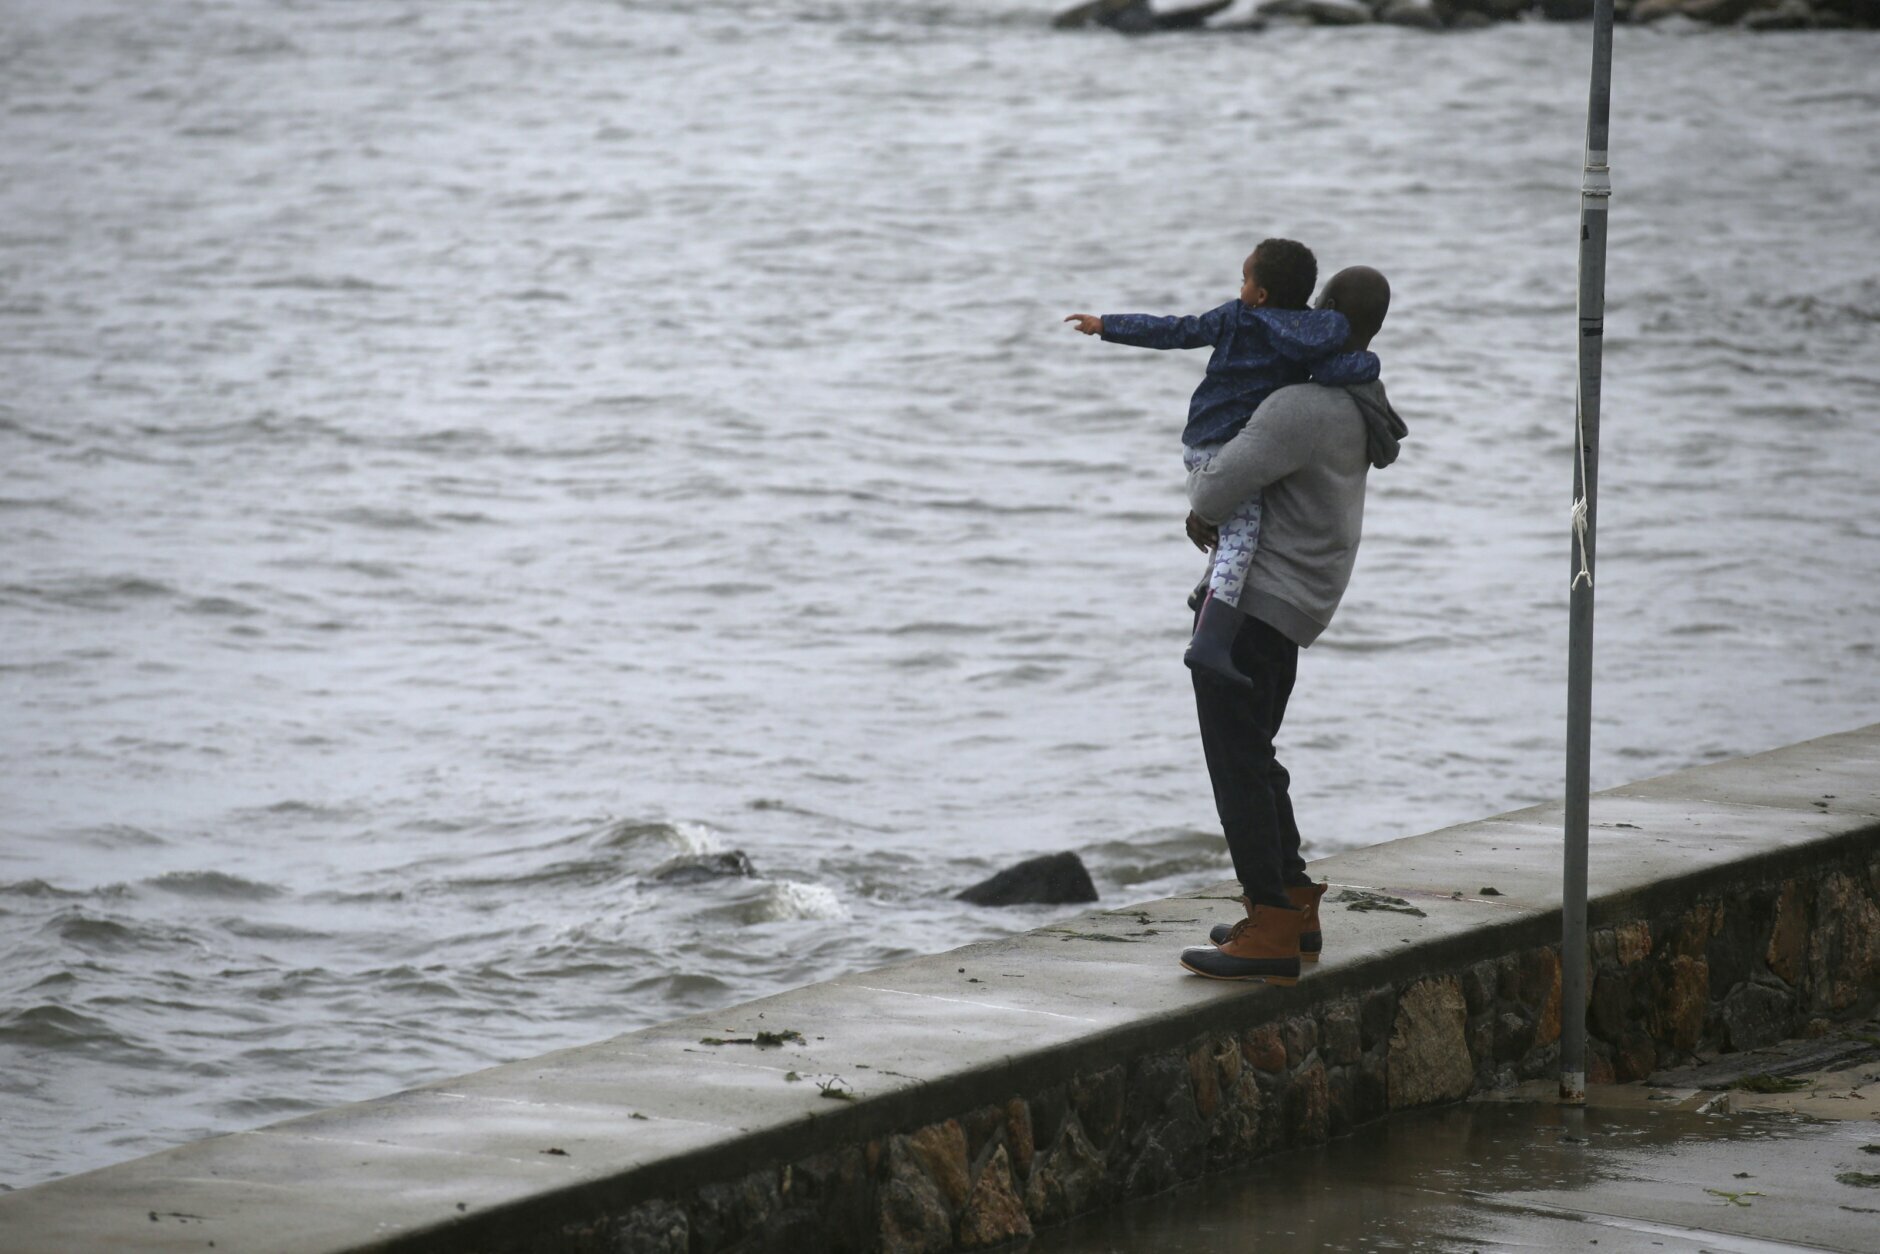 David Jeancy, from New London, Conn., holds his son Grant as they watch the waves from Pequot Point beach as Tropical Storm Henri approaches, Sunday, Aug. 22, 2021, in New London, Conn. (AP Photo/Stew Milne)